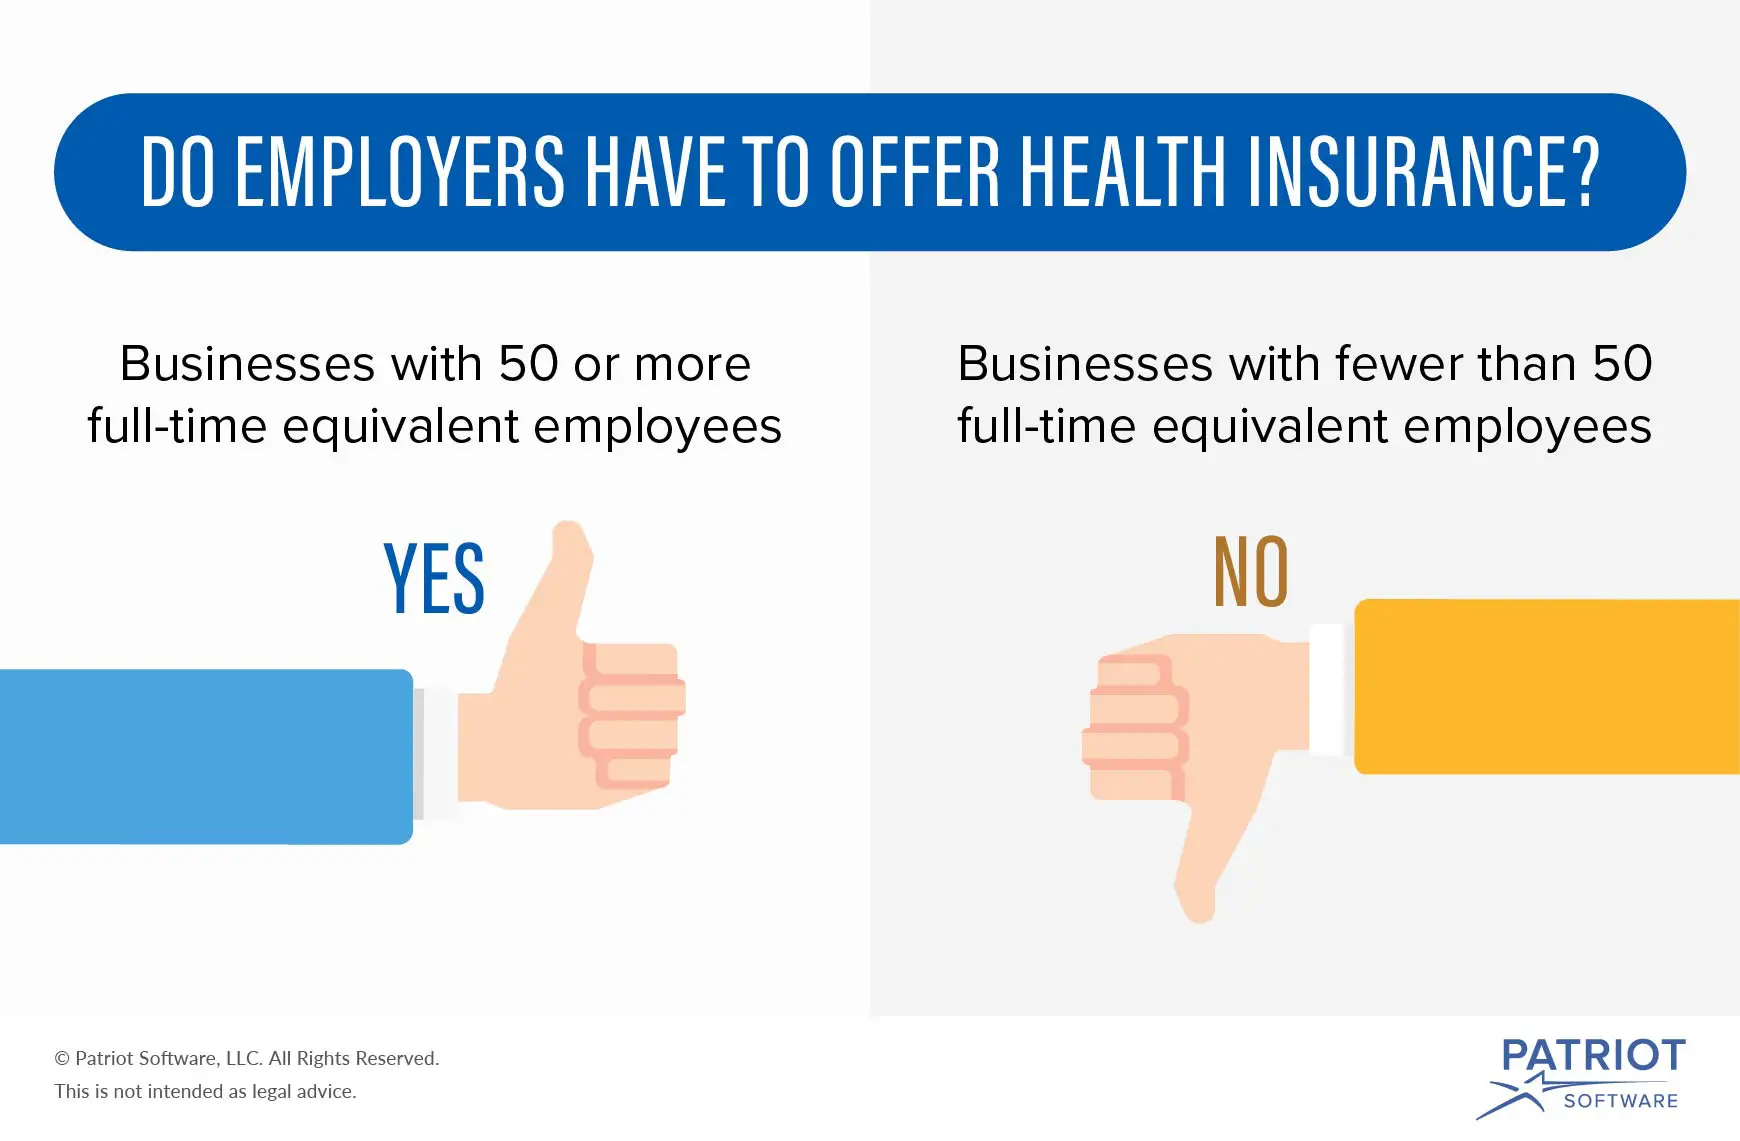 Do You Have to Offer Health Insurance?